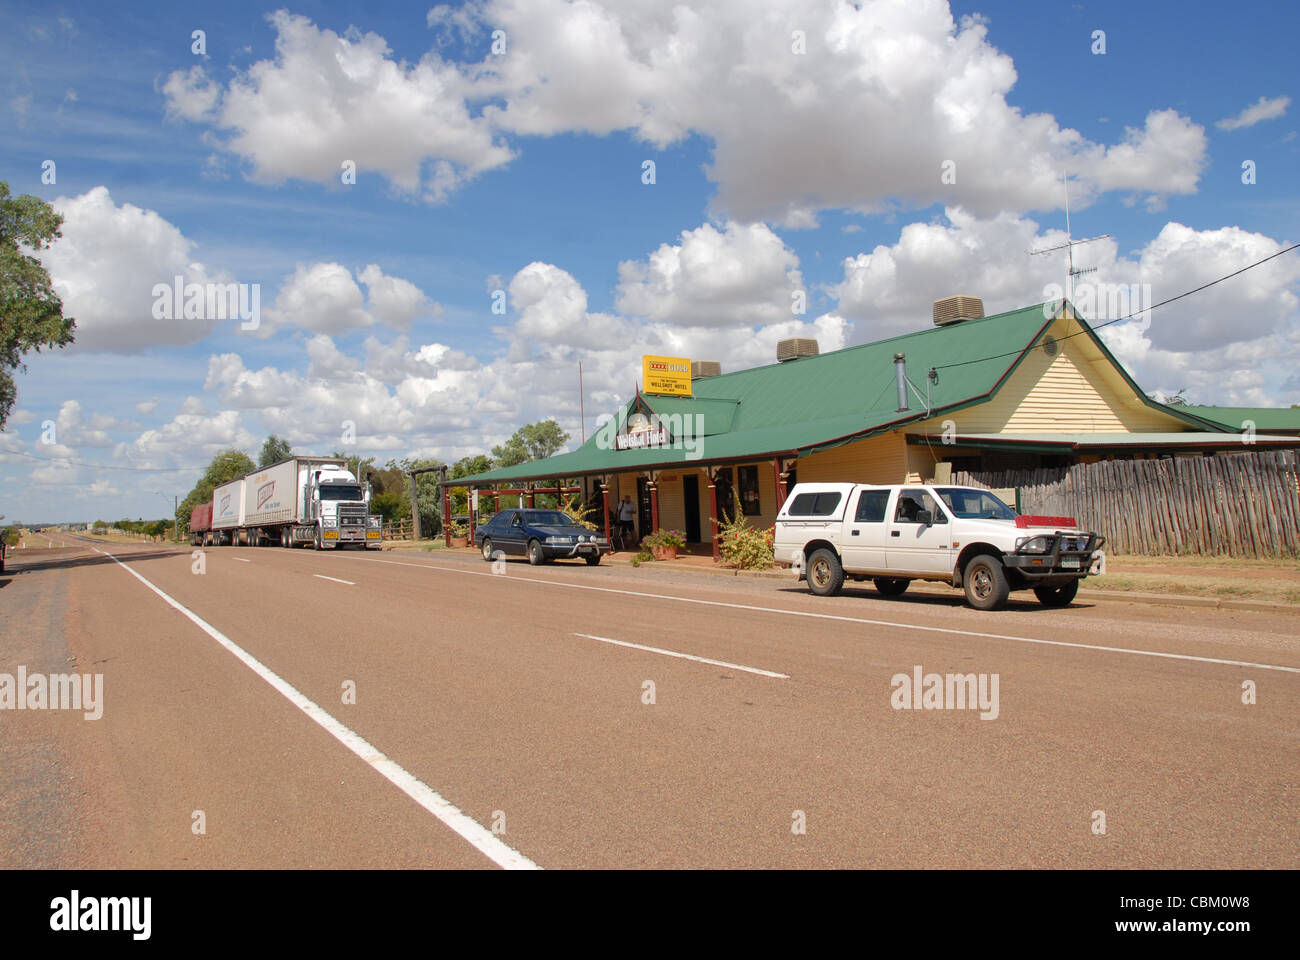 The roadside pub Wellshot Hotel off the highway in Ilracombe, Outback Queensland, Australias, with cars and roadtrain parked Stock Photo